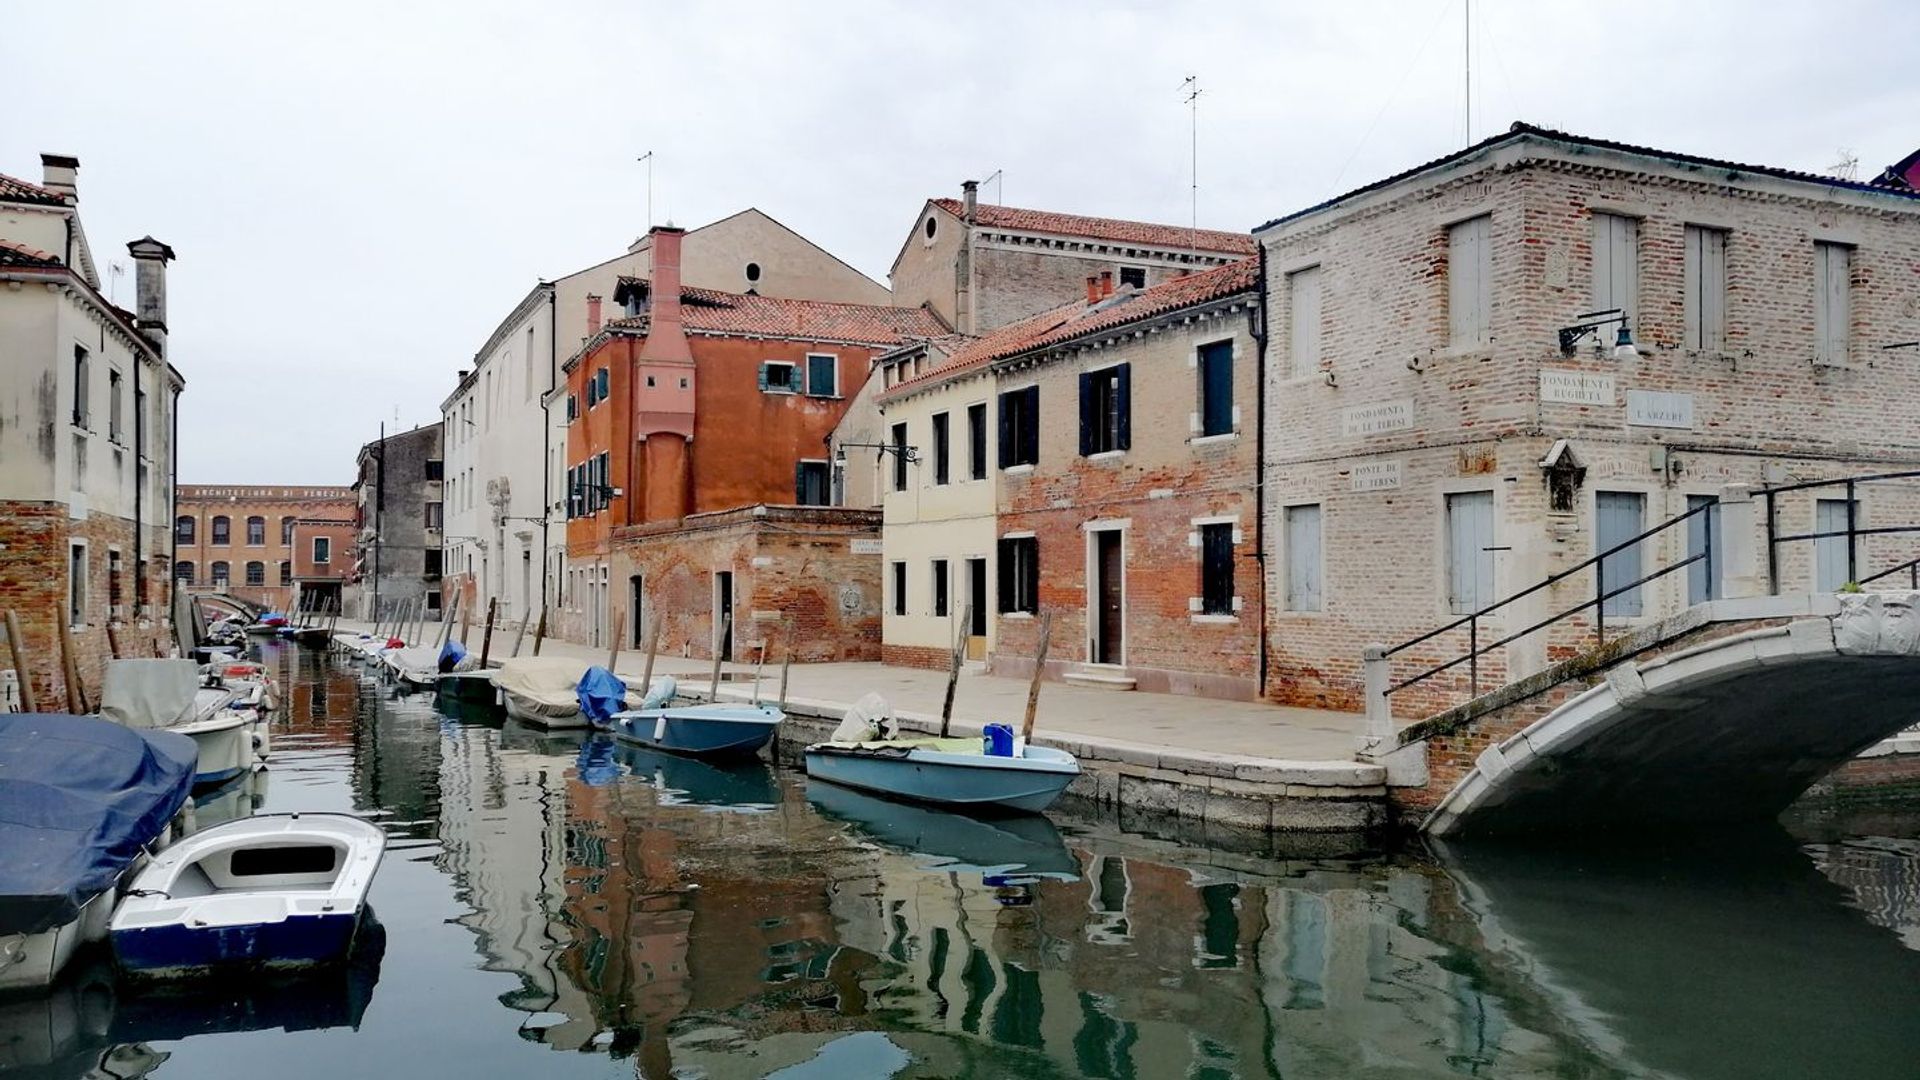 Venice Dorsoduro Walking Tour Off The Beaten Tracks with In-App Audio Guide